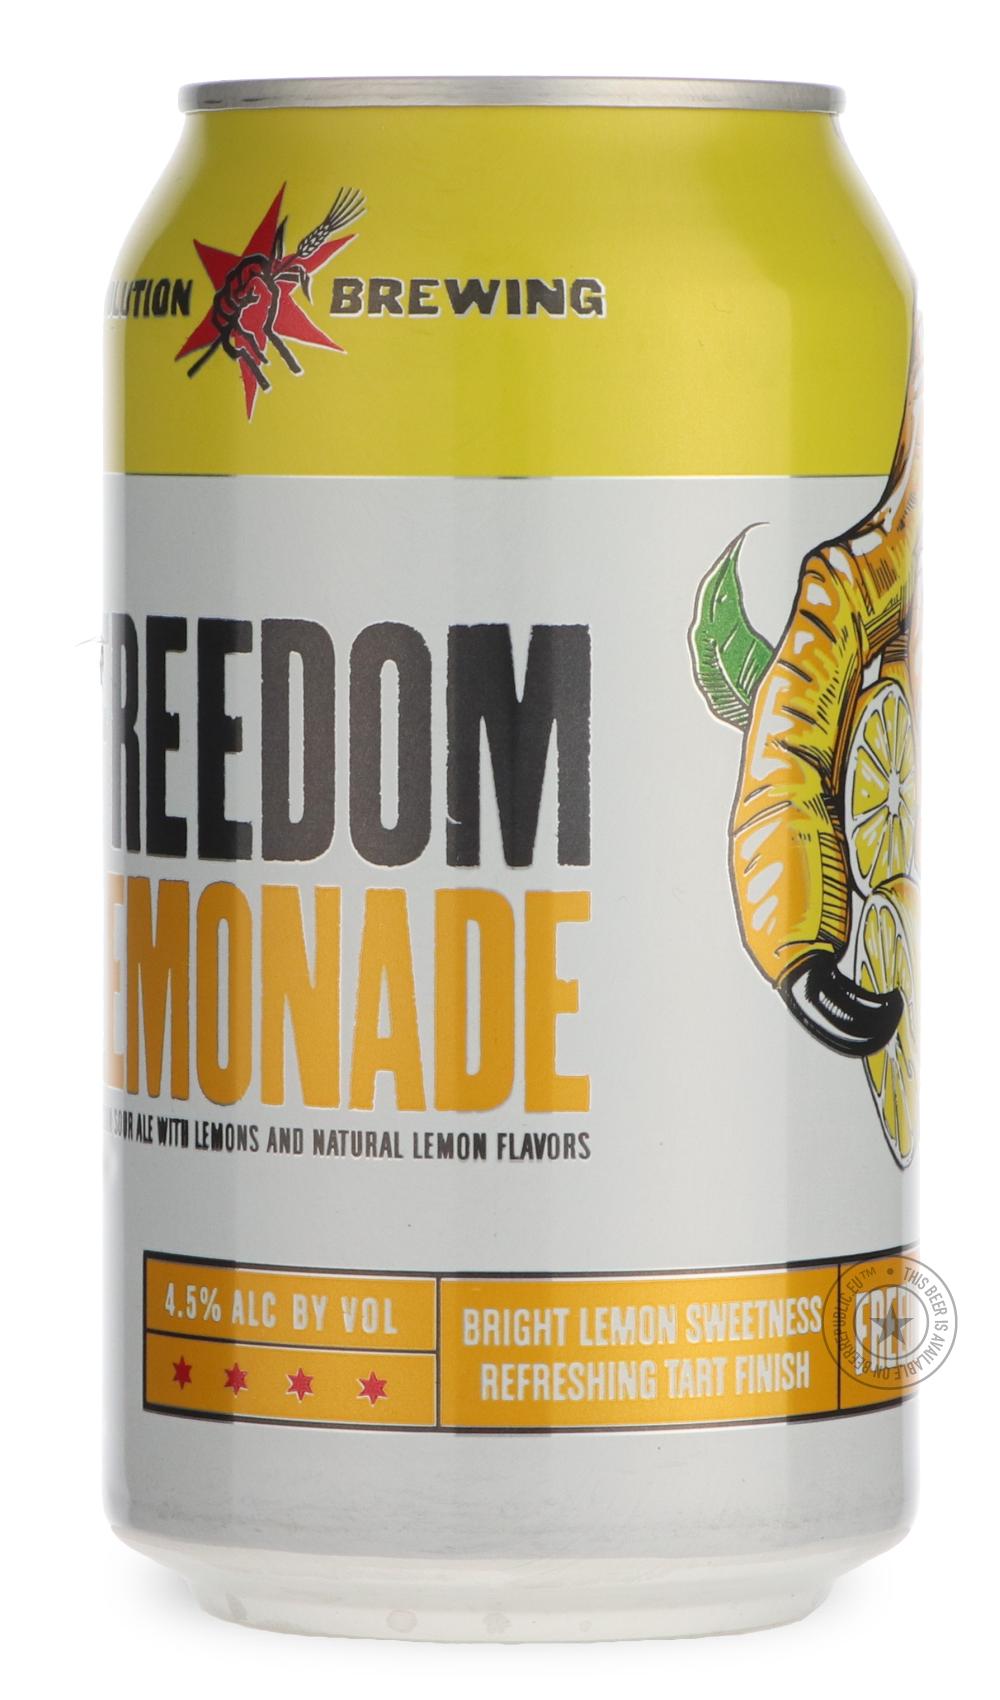 -Revolution- Freedom Lemonade-Sour / Wild & Fruity- Only @ Beer Republic - The best online beer store for American & Canadian craft beer - Buy beer online from the USA and Canada - Bier online kopen - Amerikaans bier kopen - Craft beer store - Craft beer kopen - Amerikanisch bier kaufen - Bier online kaufen - Acheter biere online - IPA - Stout - Porter - New England IPA - Hazy IPA - Imperial Stout - Barrel Aged - Barrel Aged Imperial Stout - Brown - Dark beer - Blond - Blonde - Pilsner - Lager - Wheat - Wei